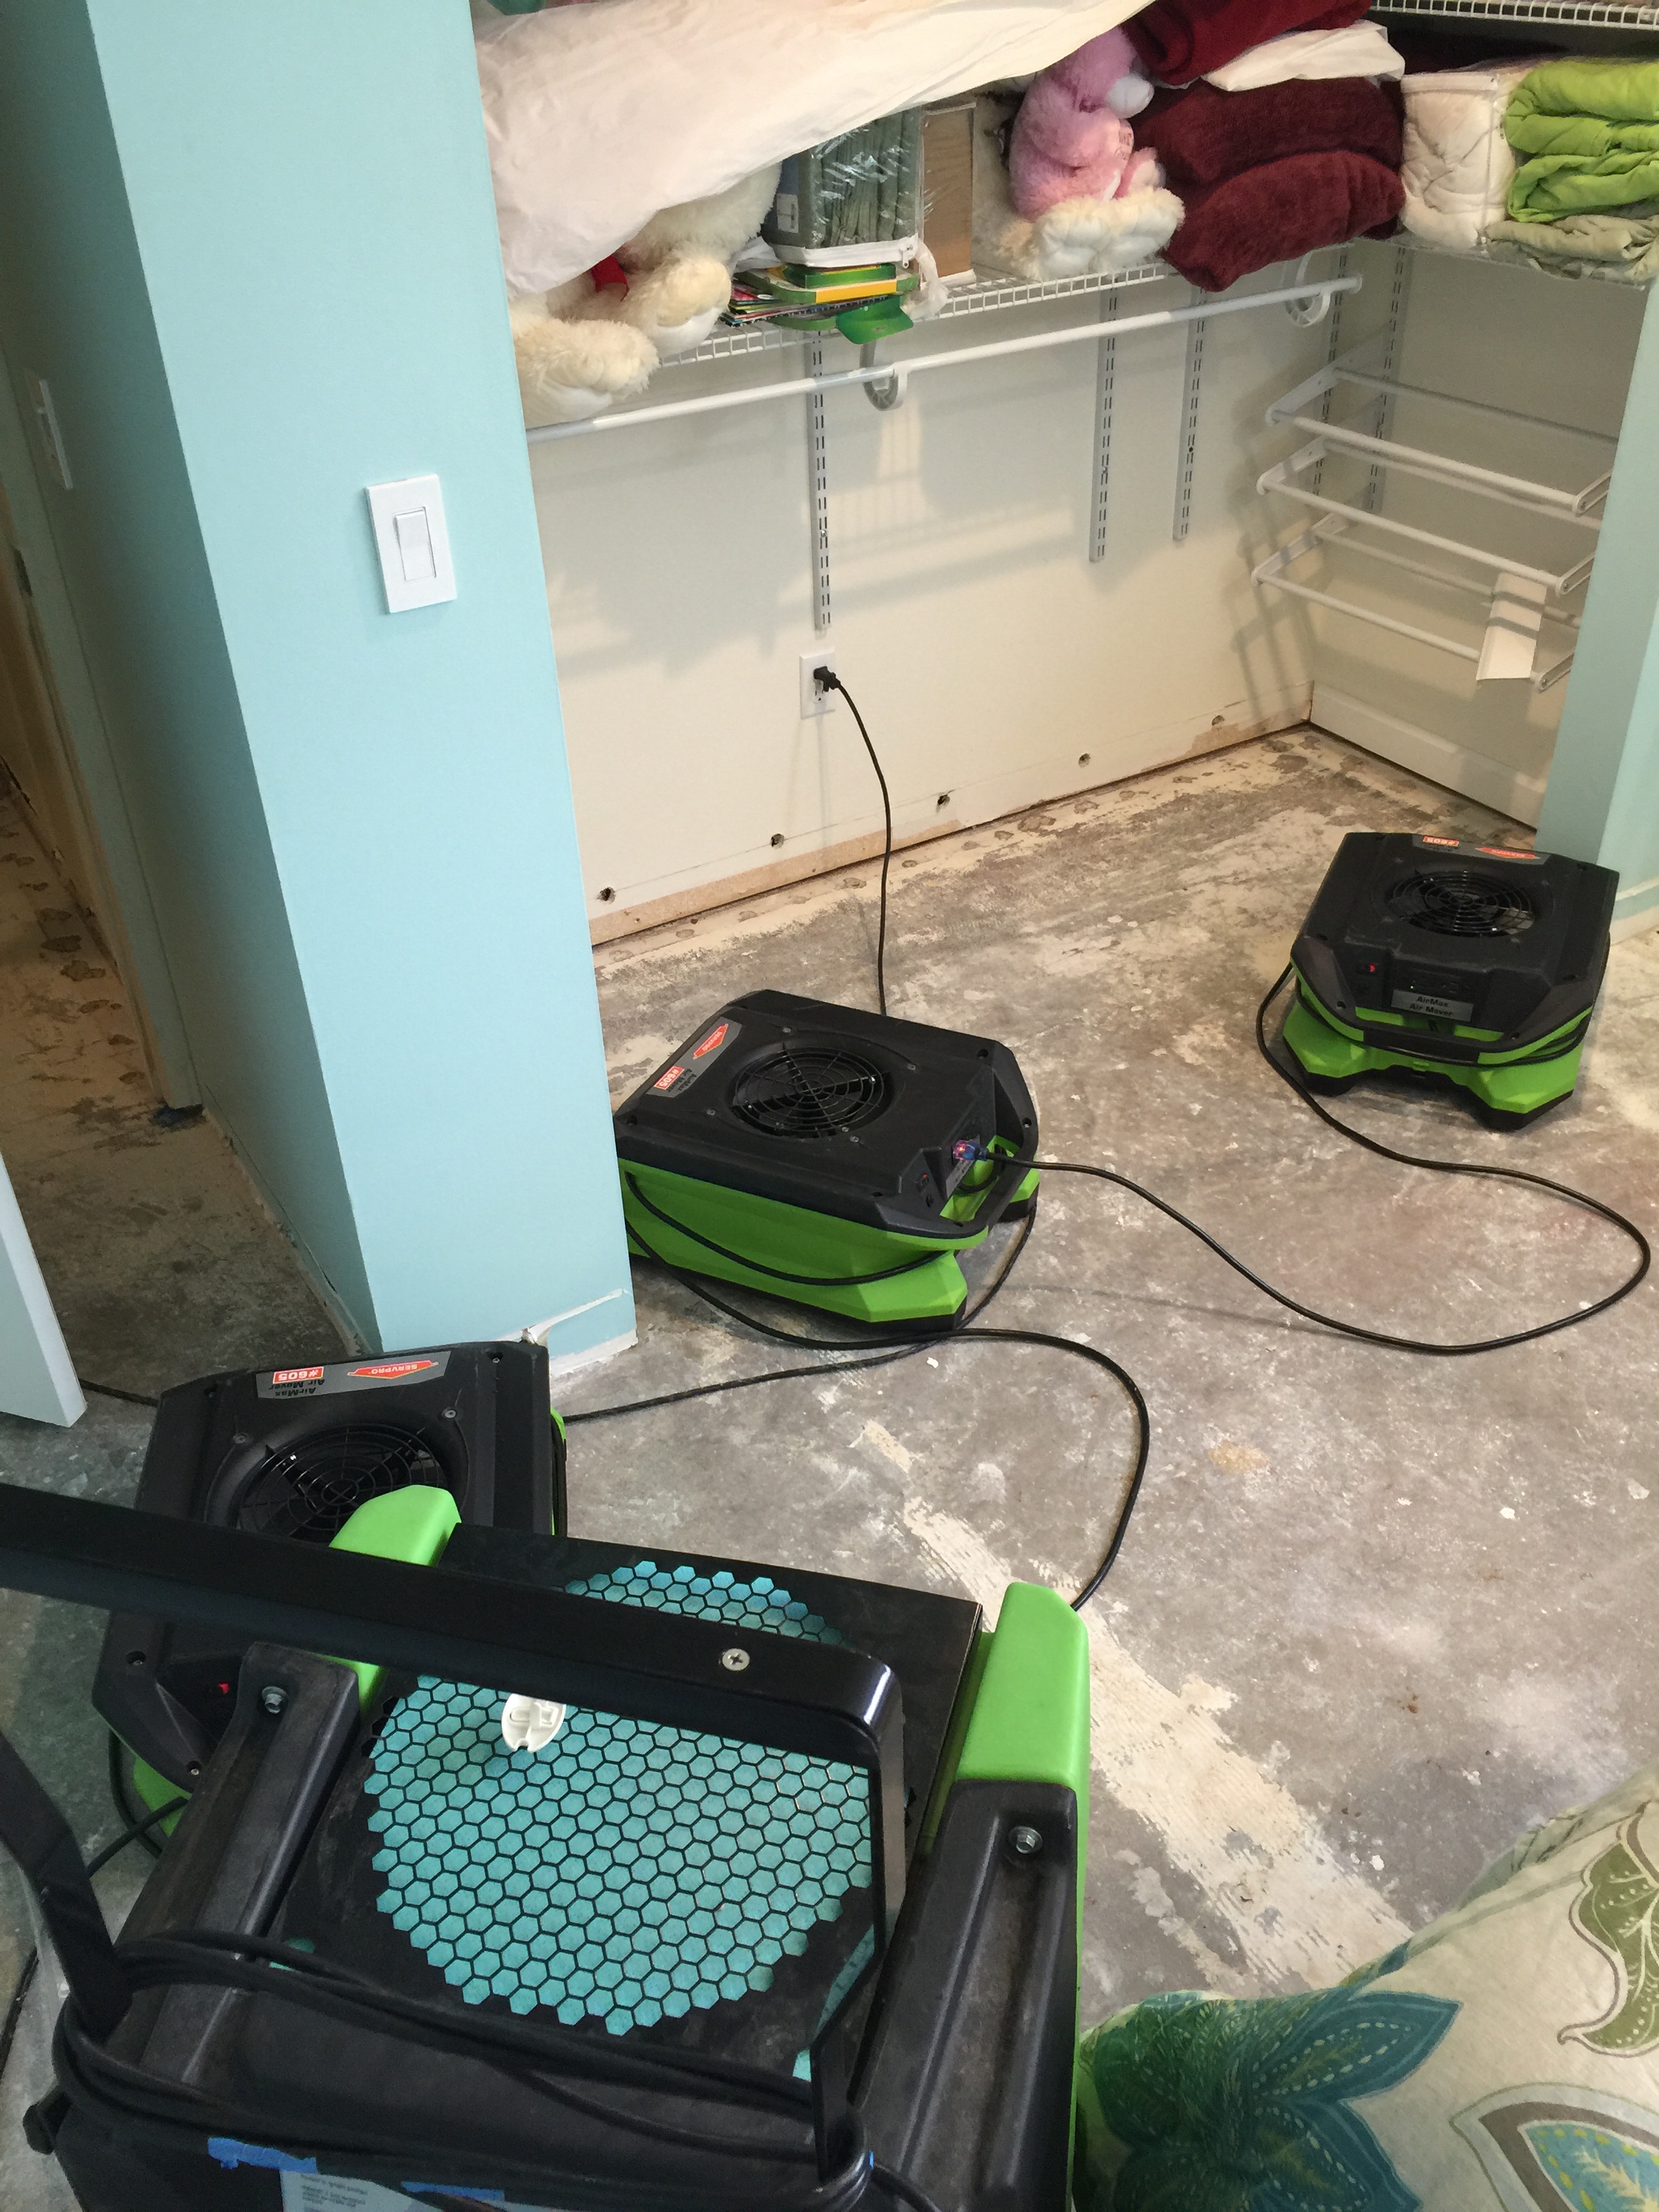 Got the SERVPRO equipment up and running!